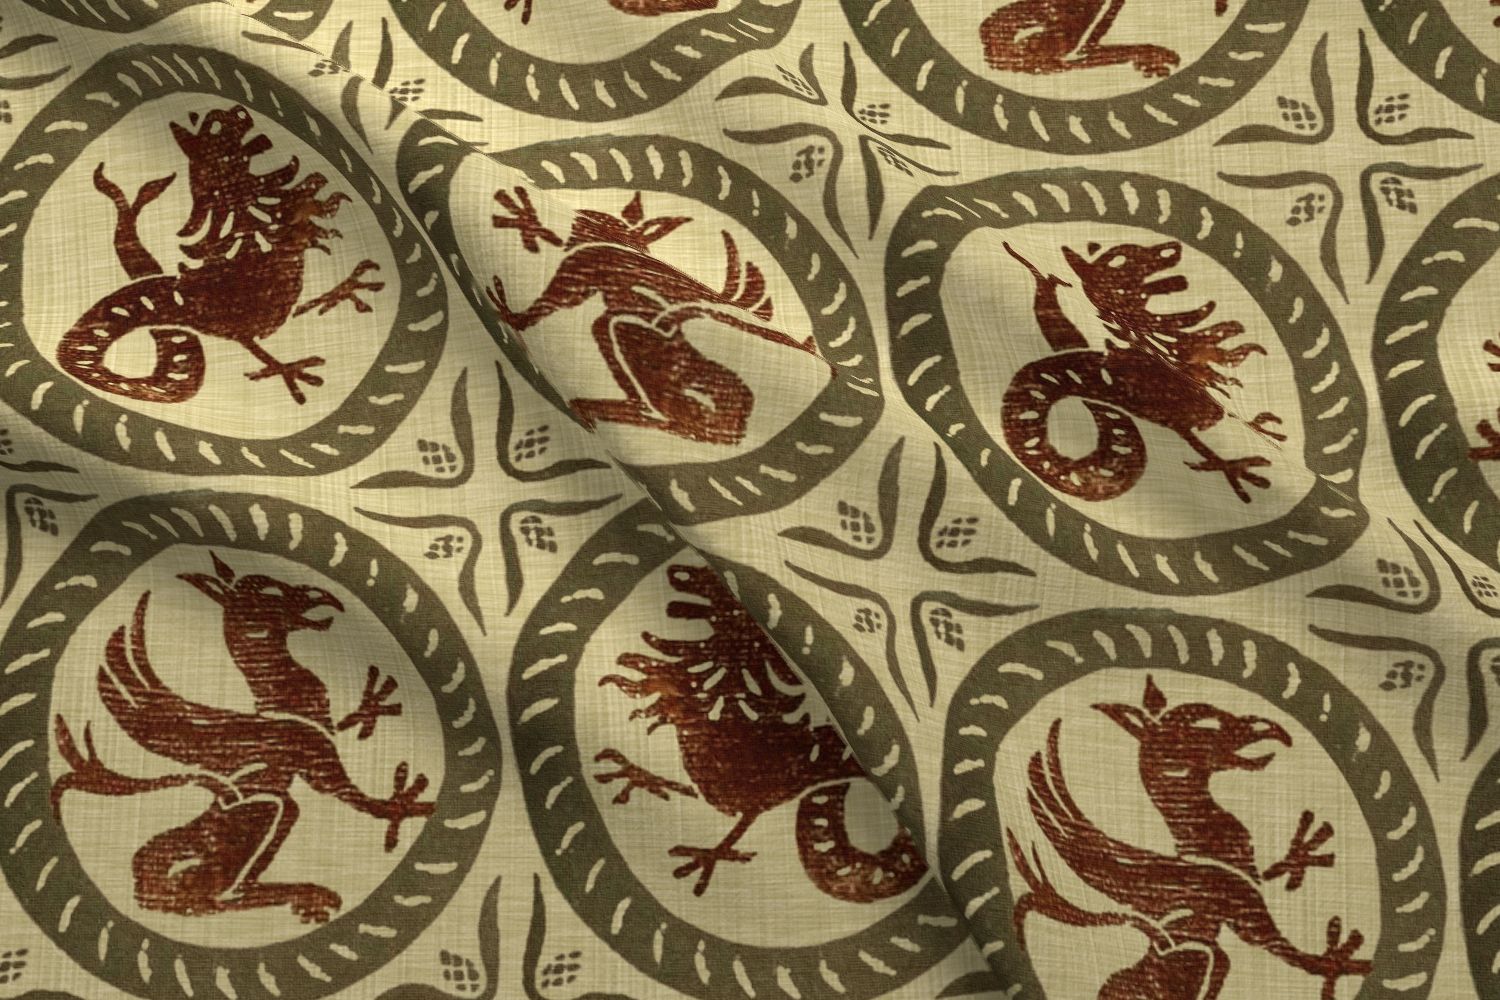 13th Century Dragon Tile - 13th Century Fabric Reproduction , HD Wallpaper & Backgrounds